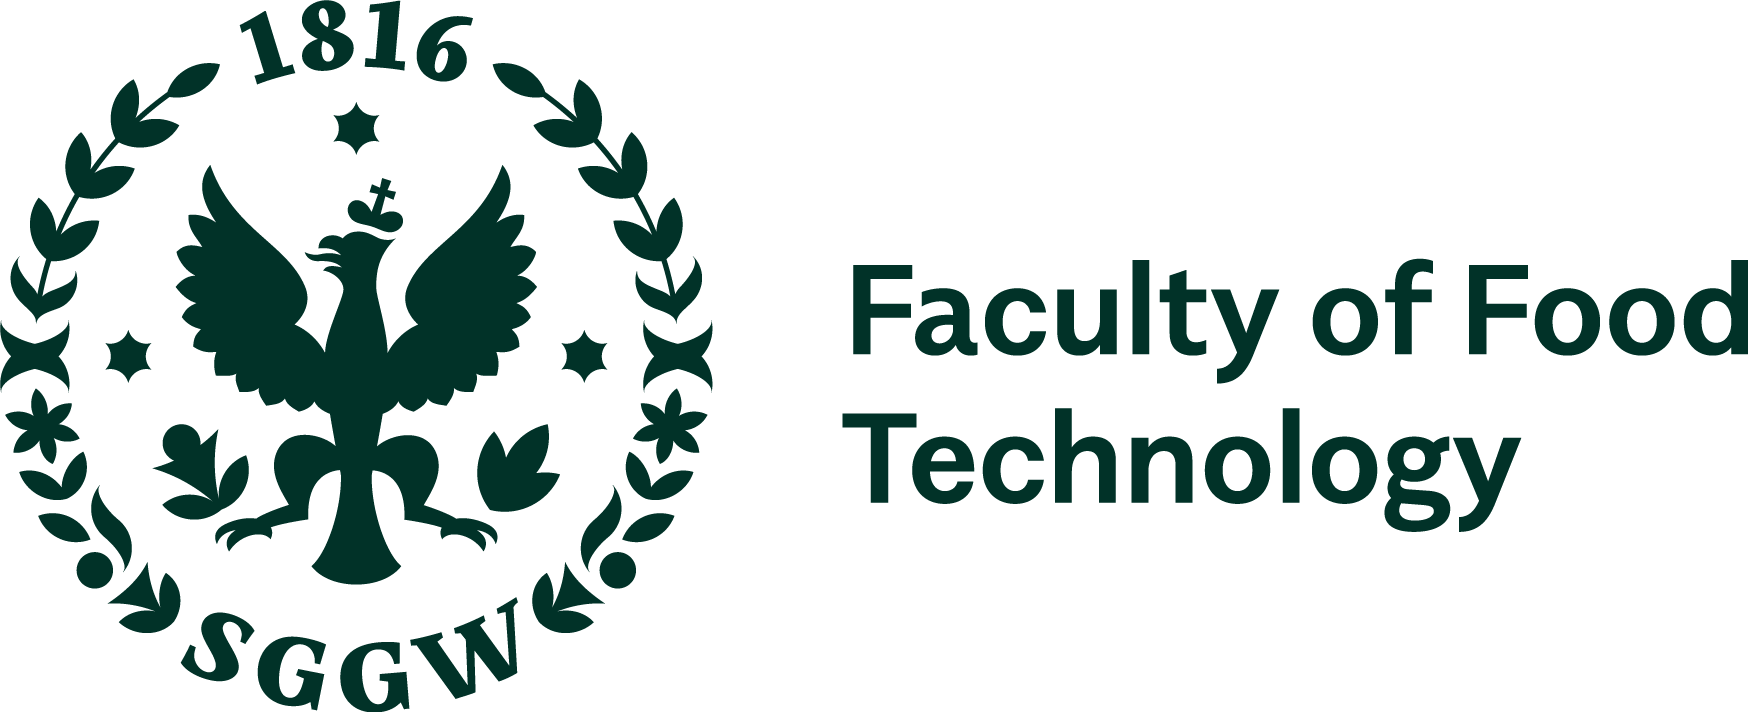 FACULTY OF FOOD TECHNOLOGY